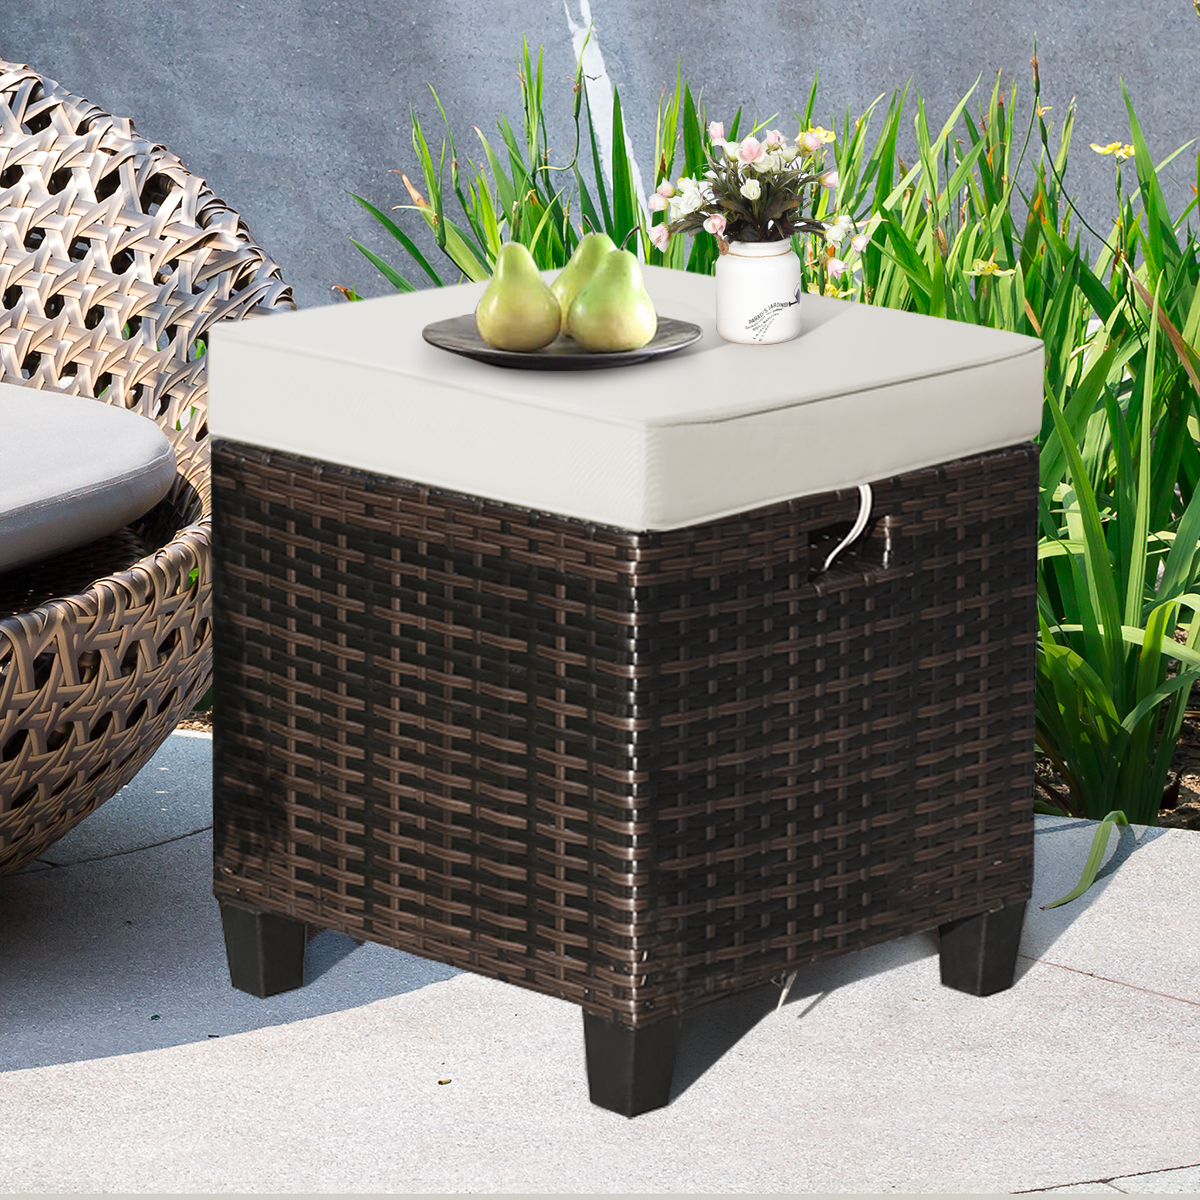 Costway 2PCS Patio Rattan Ottoman Cushioned Seat Foot Rest Coffee Table - image 2 of 10